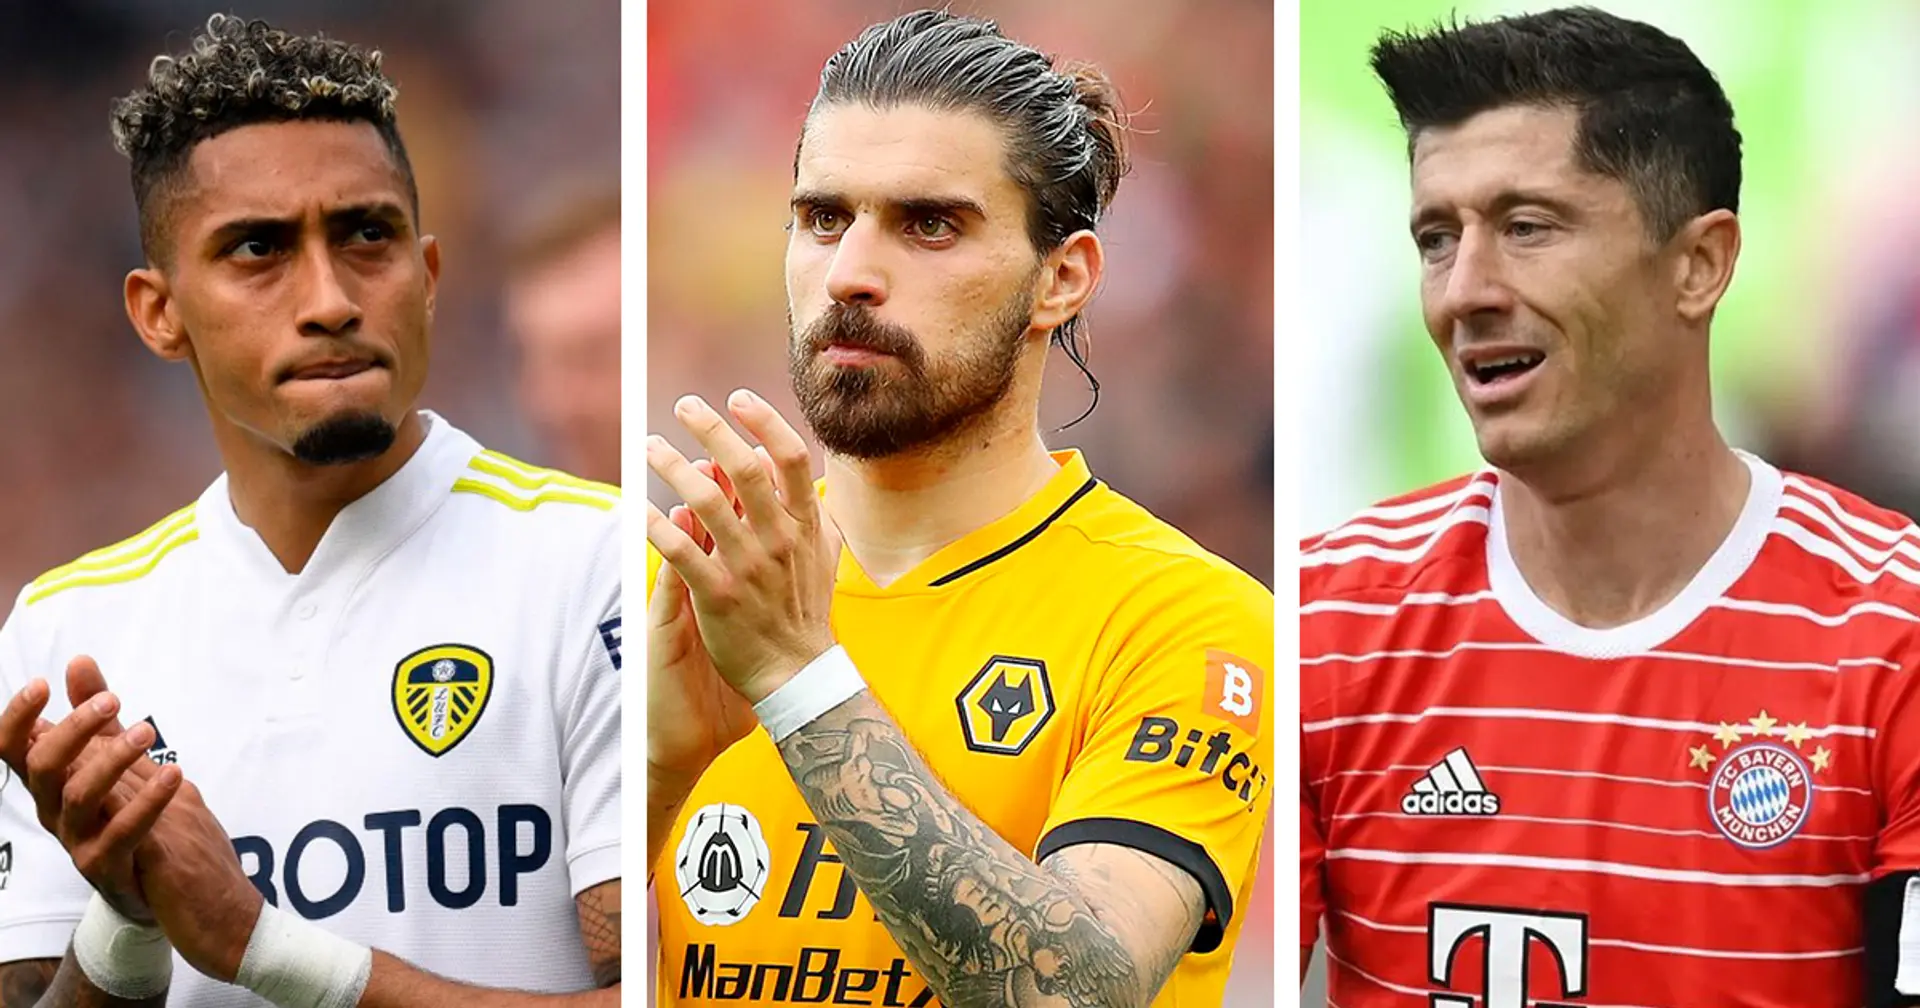 Raphinha 8, Neves 4: rating probability of latest transfer rumours out of 10